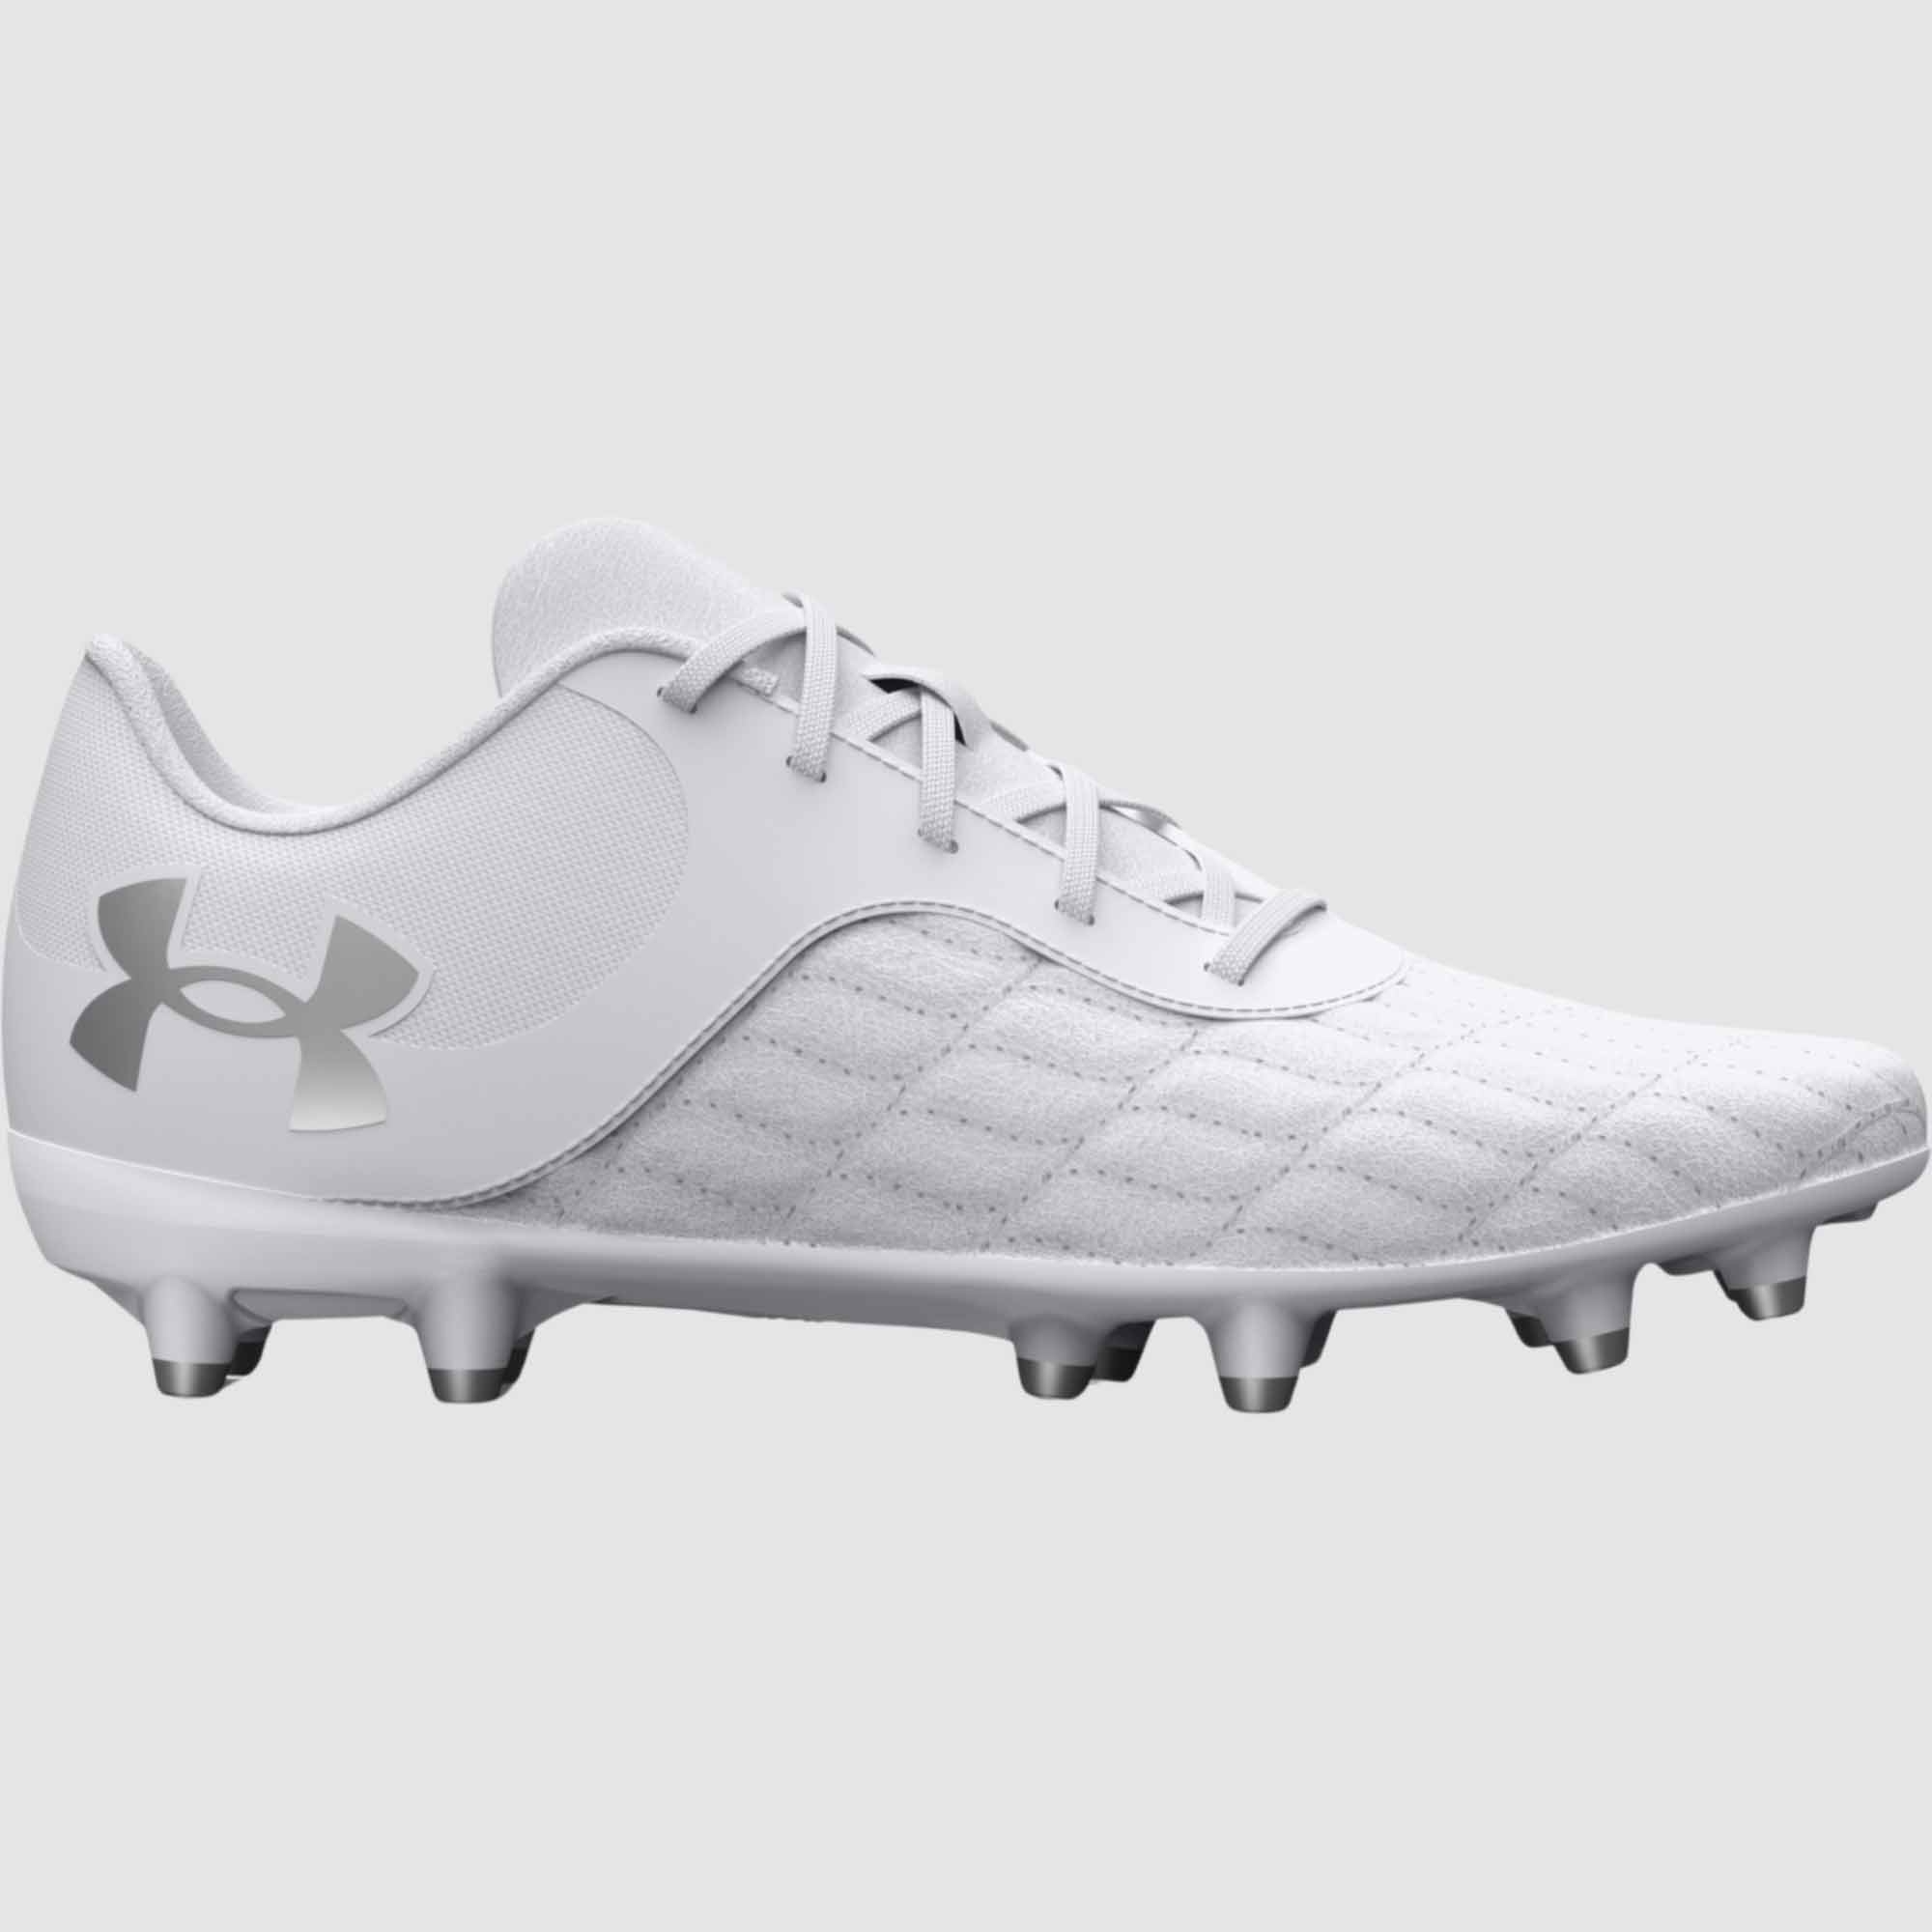 Under Armour Unisex Magnetico Select 3 FG Football Boots